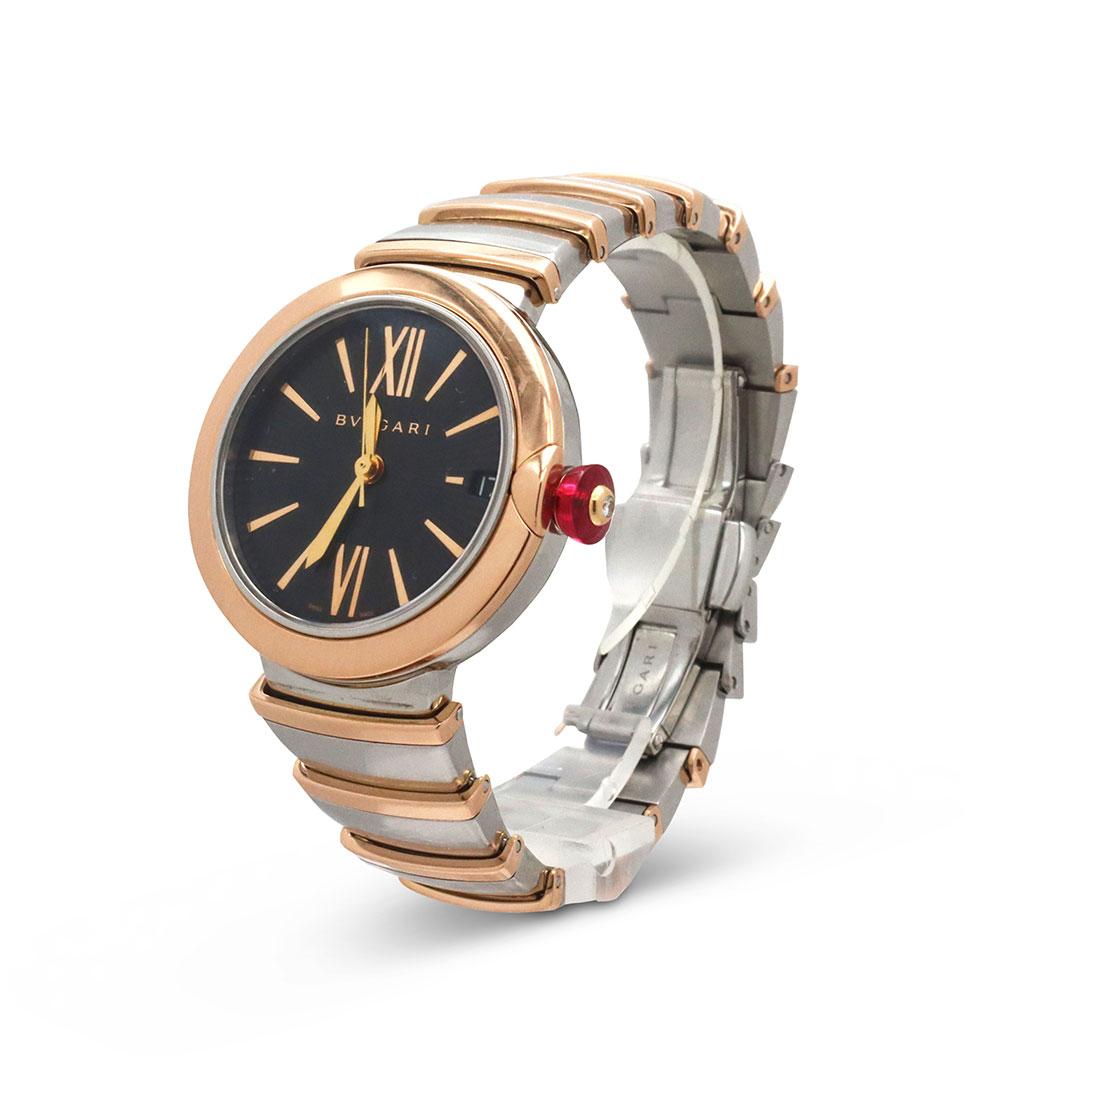 Authentic Bvlgari LVCEA  Ladies watch crafted in 18 karat rose gold and stainless steel.   Featuring a 33 mm case with black sundial guilloche pattern dial, Roman Numeral hour markers, and a transparent case back.  The 18 karat rose gold crown is